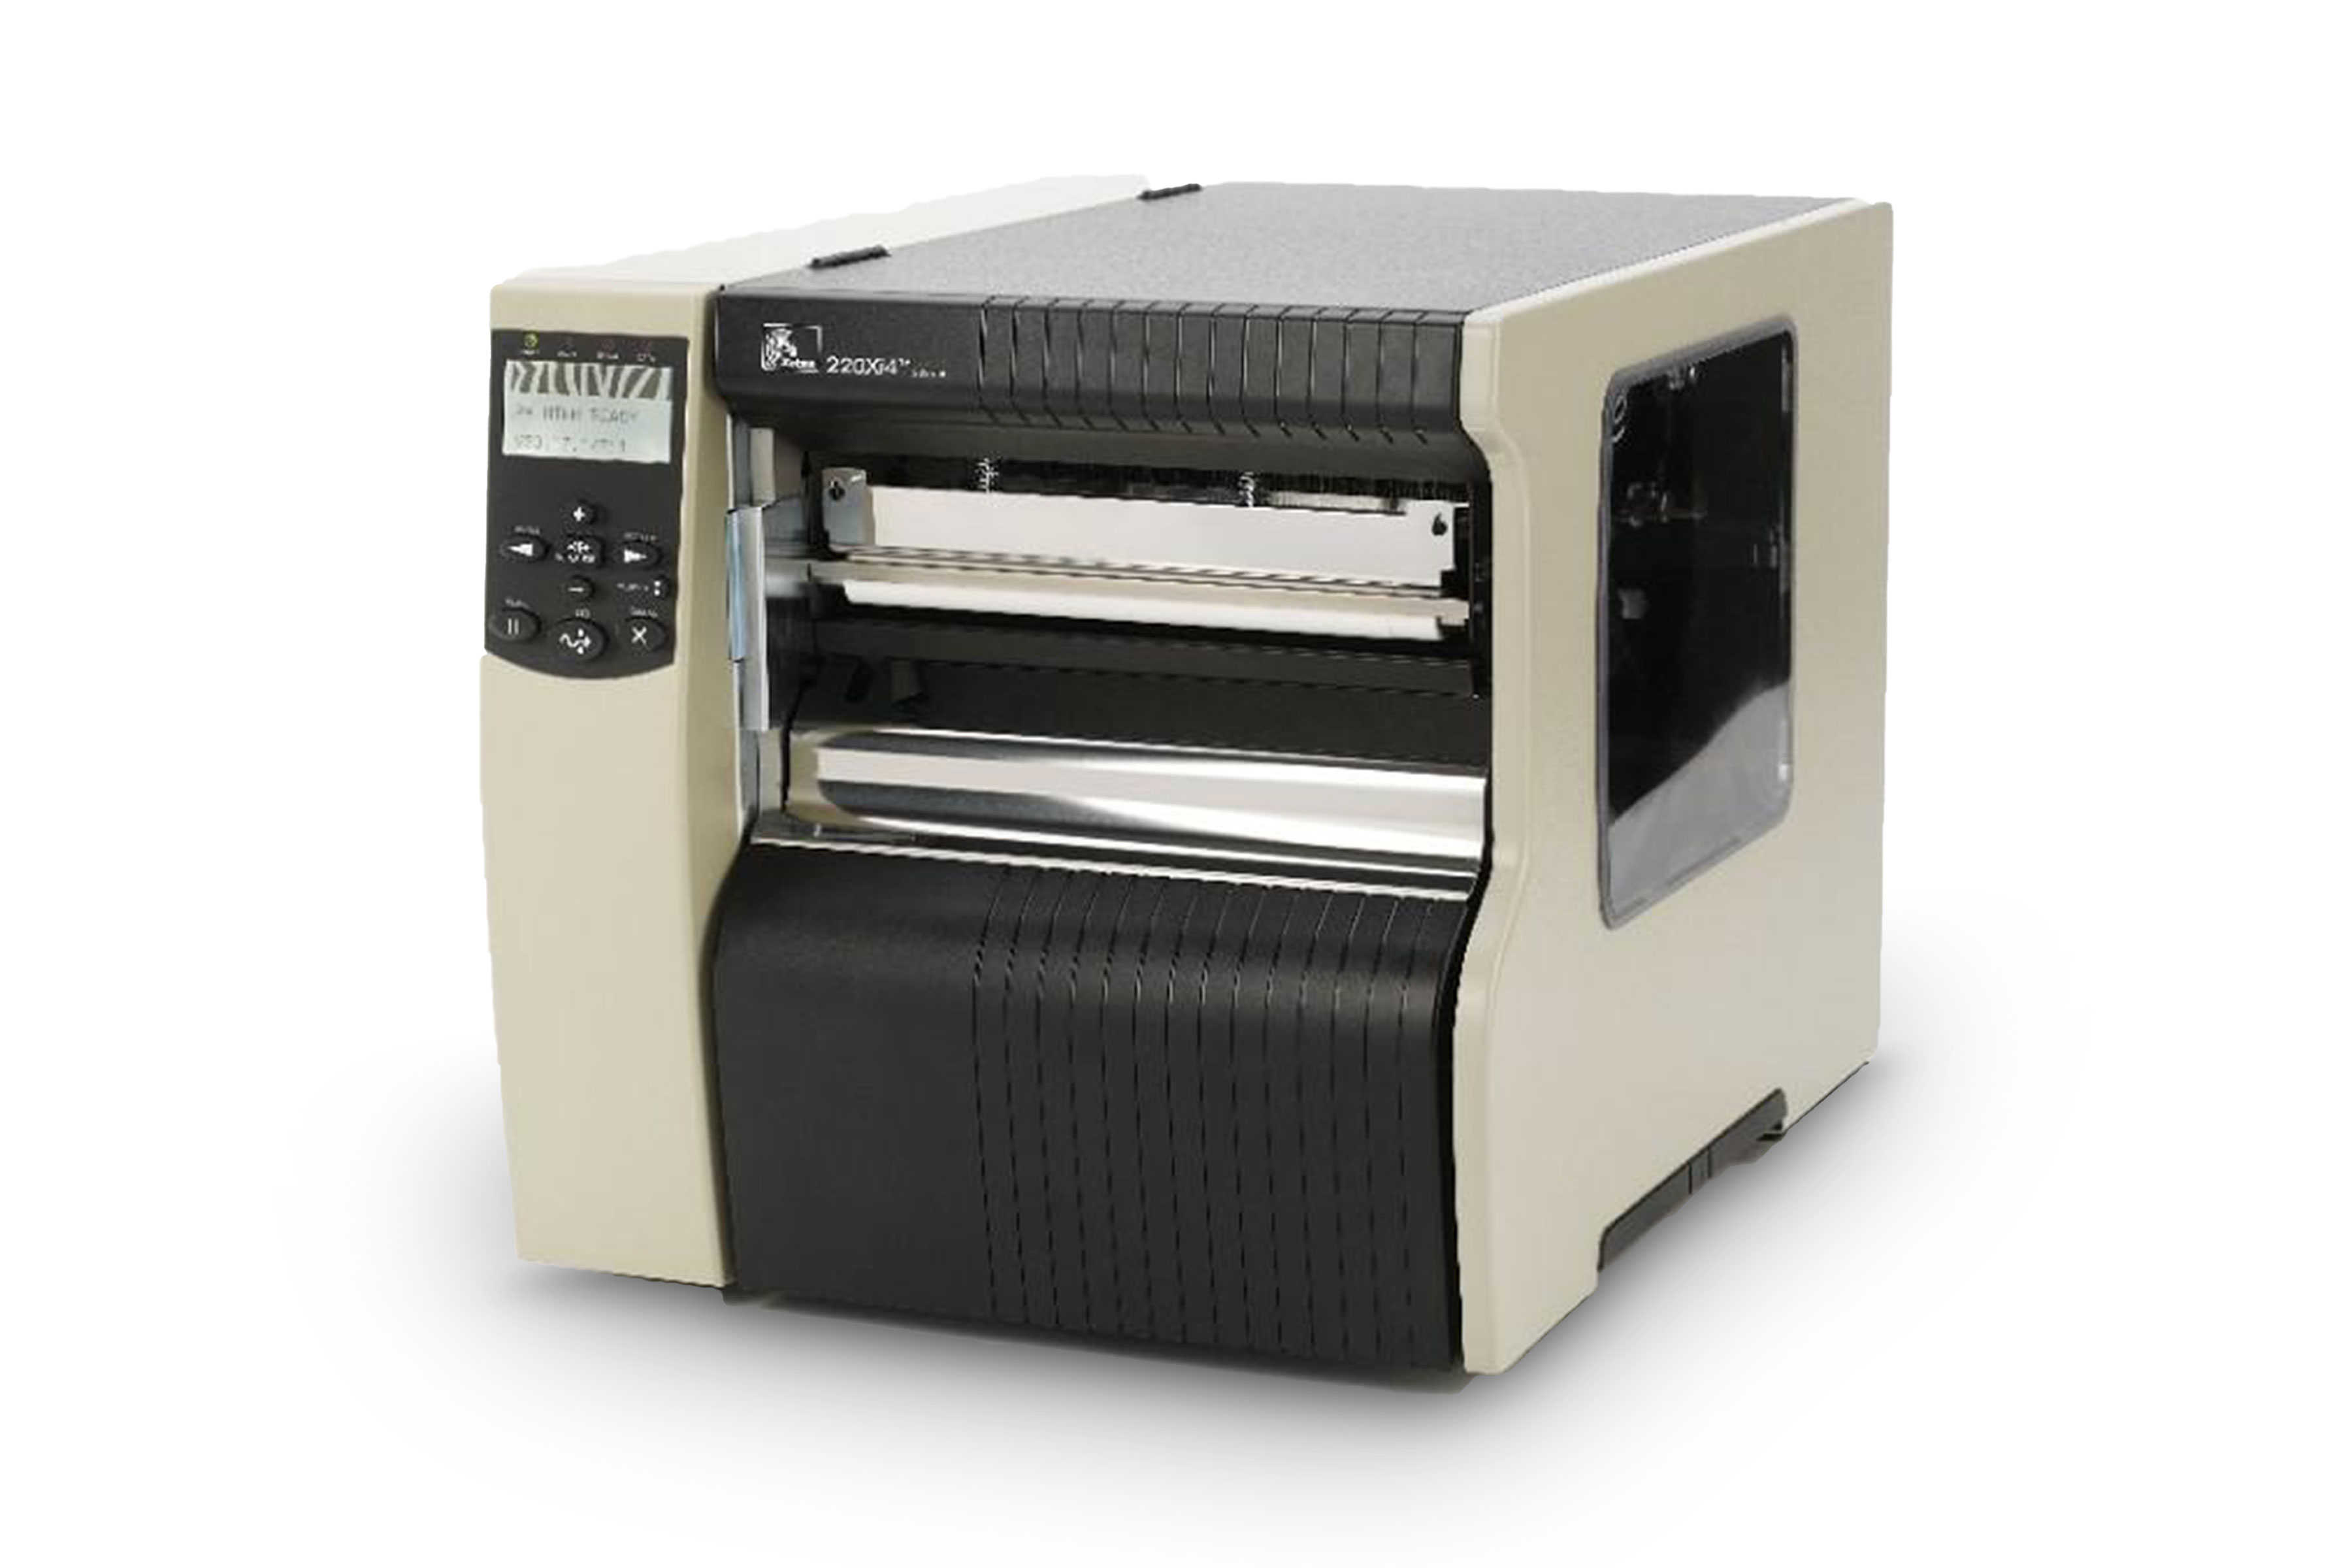 Zebra 220xi4 industrial printer with thermal transfer, clear media side door and media hanger